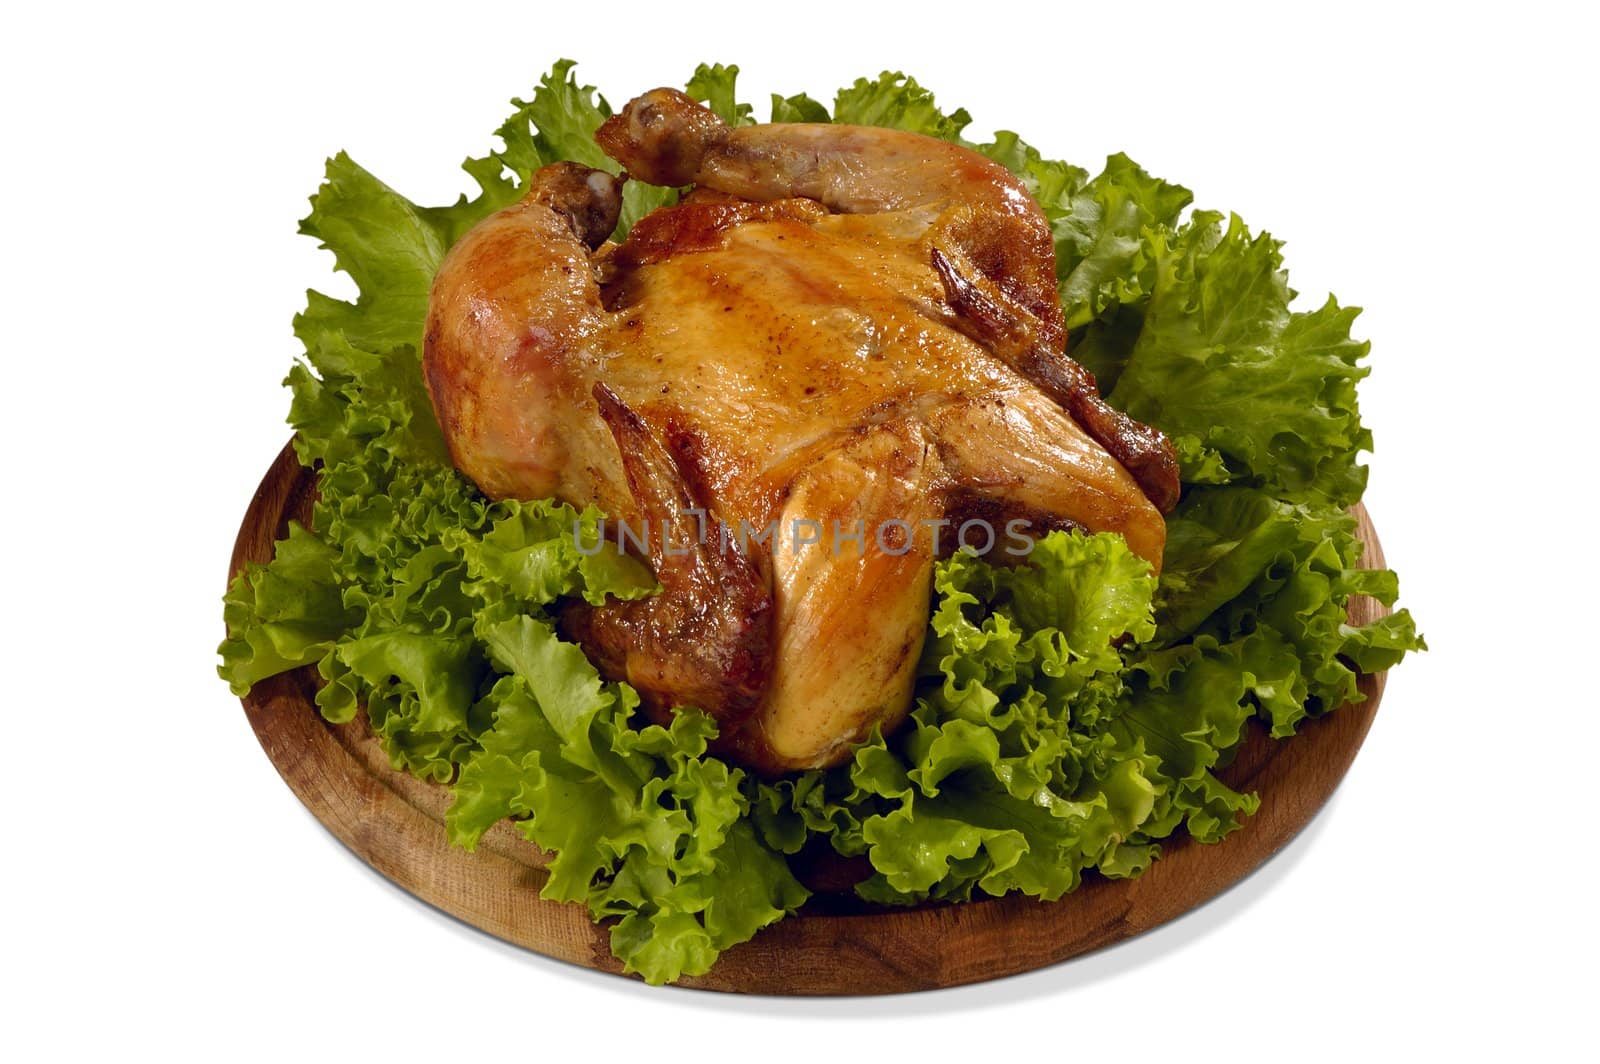 Roast Chicken by dyoma